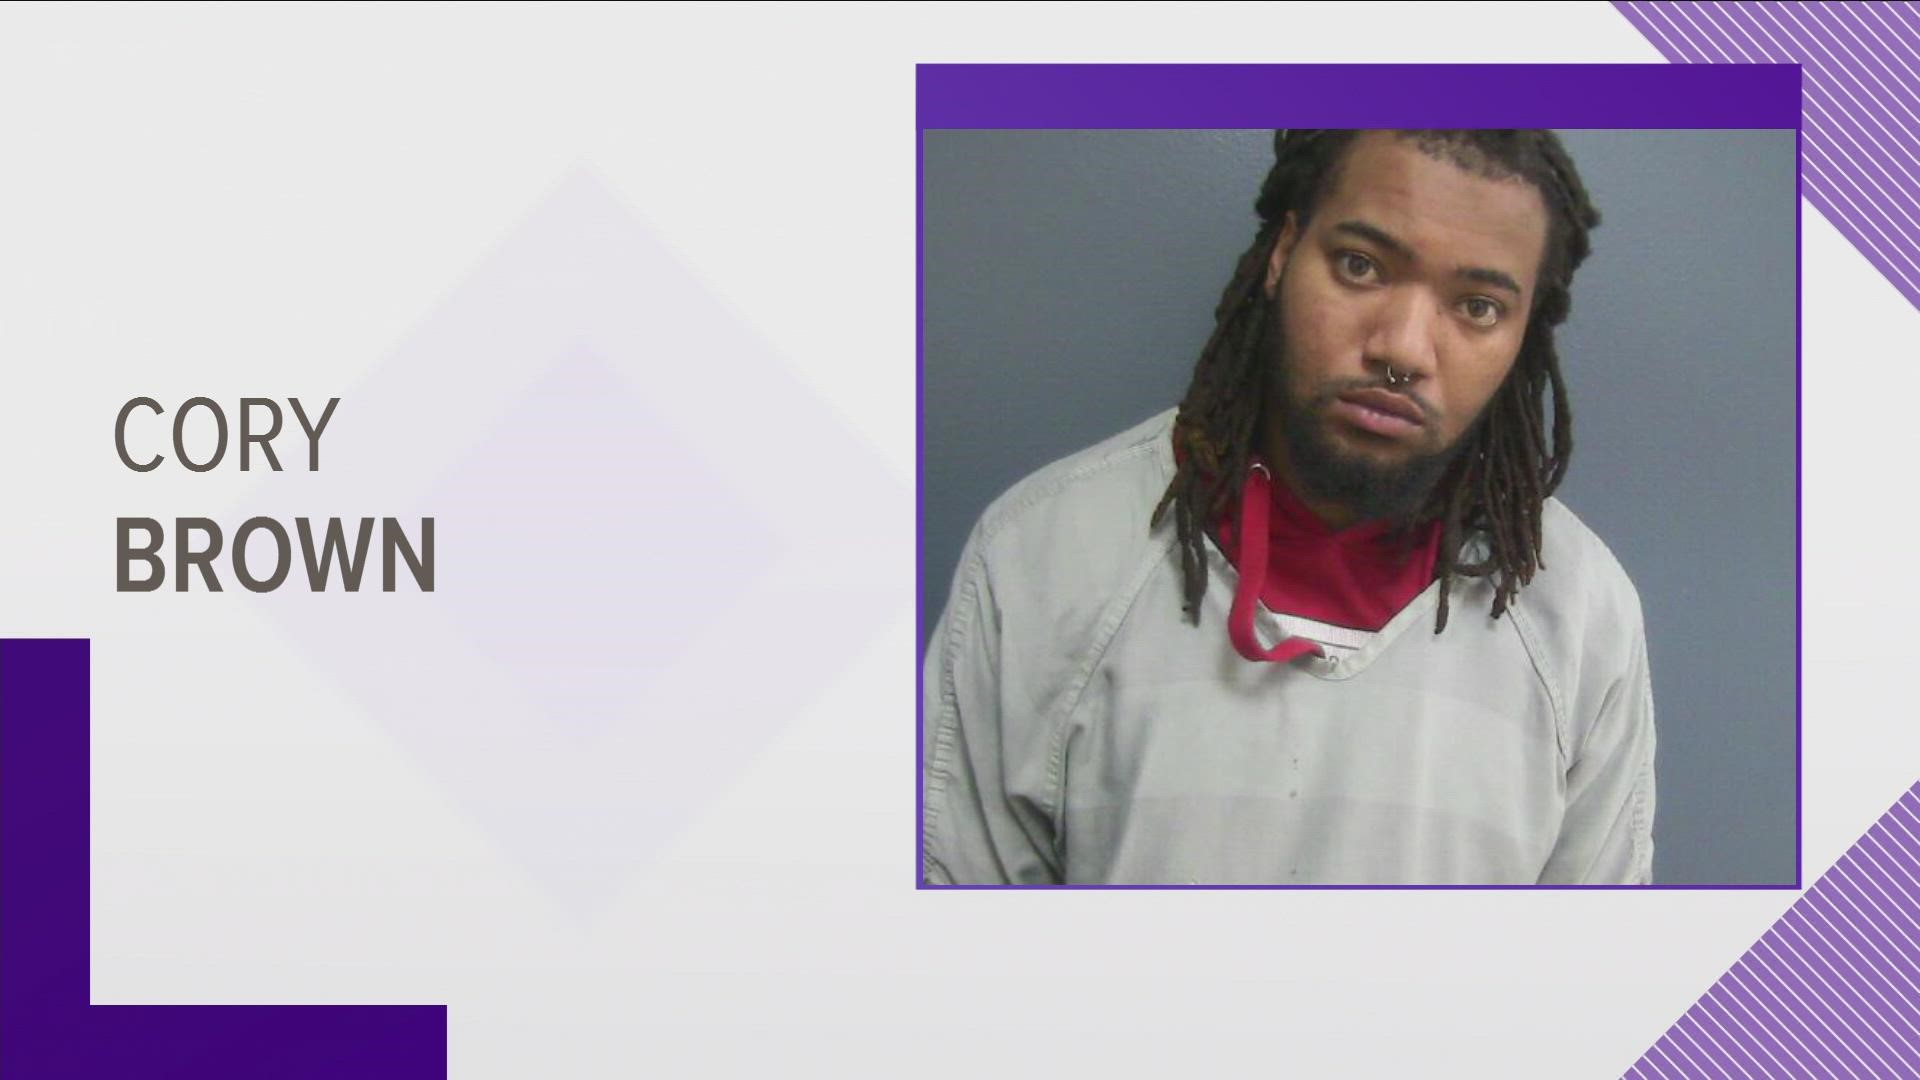 A Knoxville man has been charged with shooting another person last September in Sevierville.